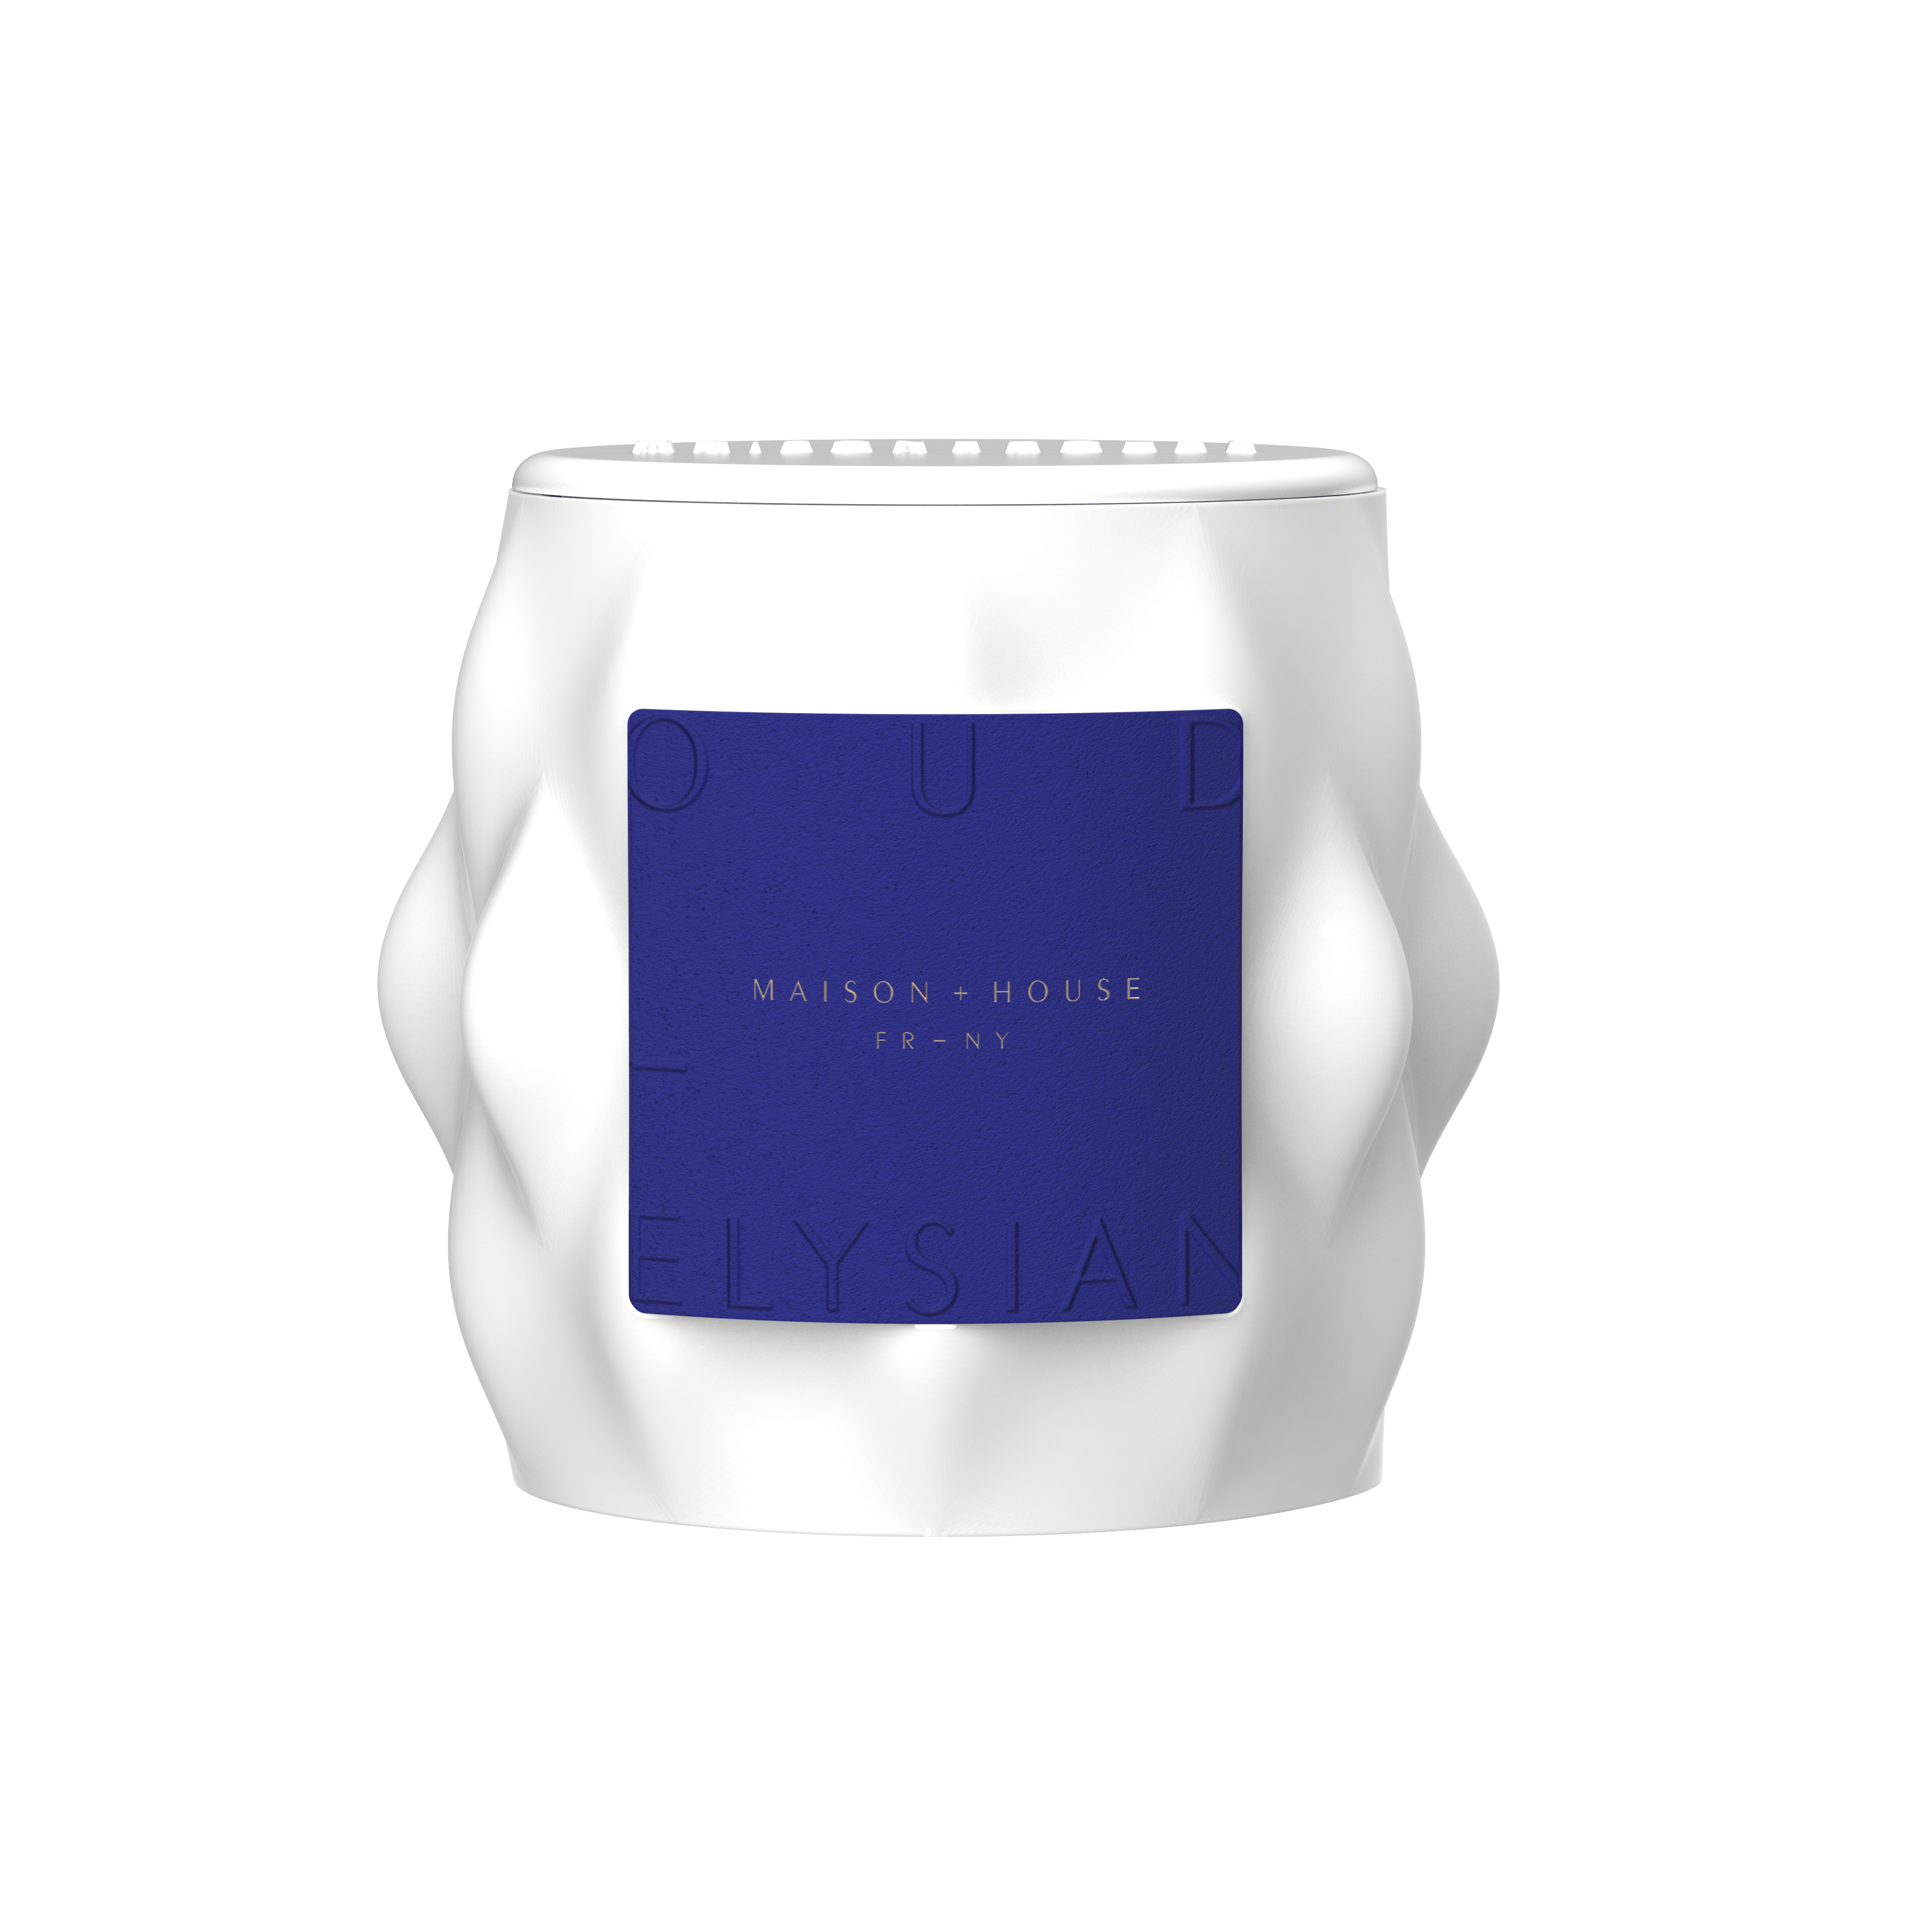 Maison+House Oud Elysian Artisanal French-Fragrance Candle in Limoges Porcelain — Reserve Collection —